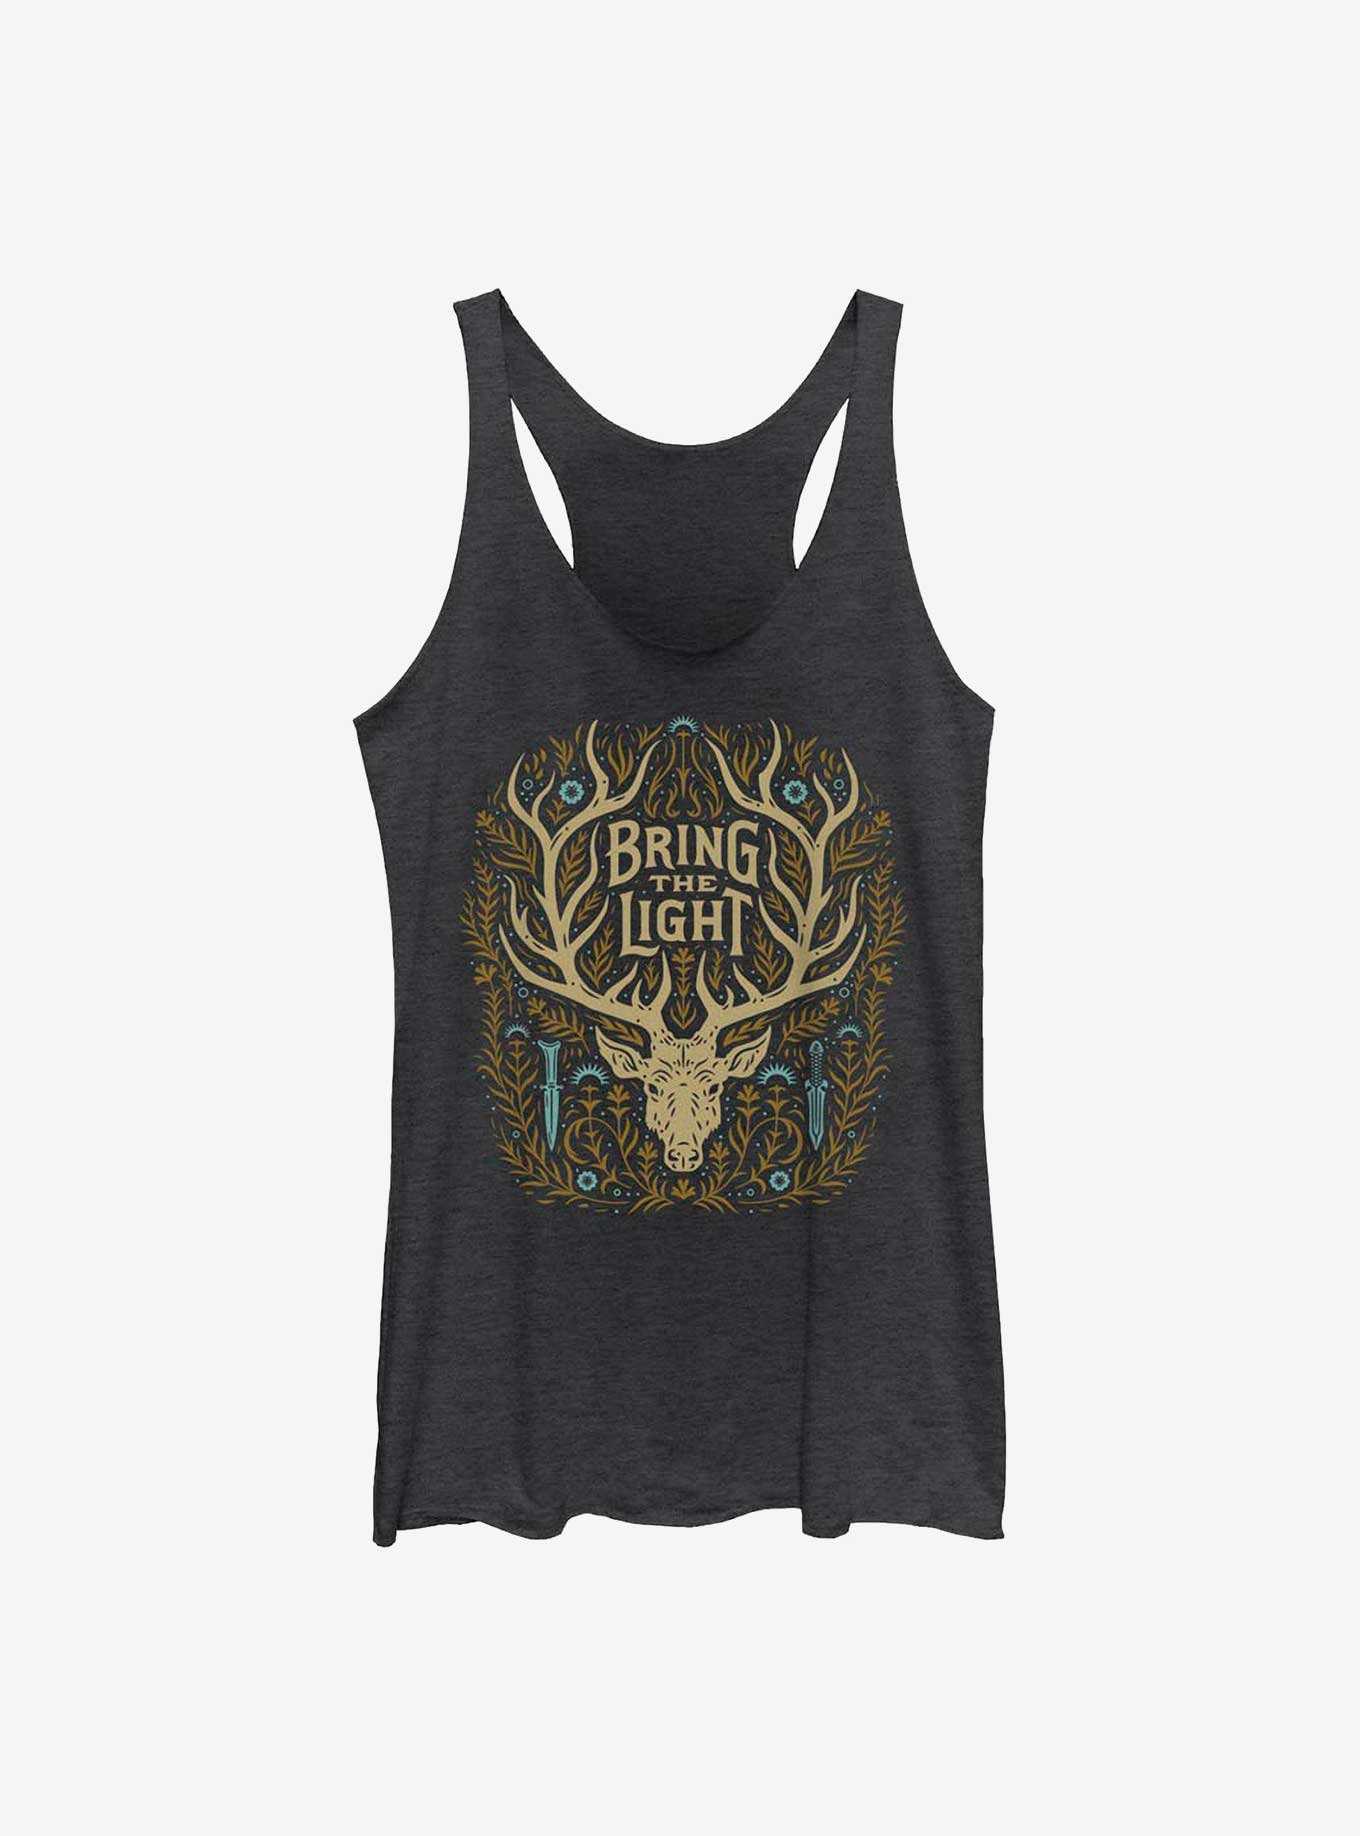 Shadow and Bone Bring The Light Stag Girls Tank, , hi-res